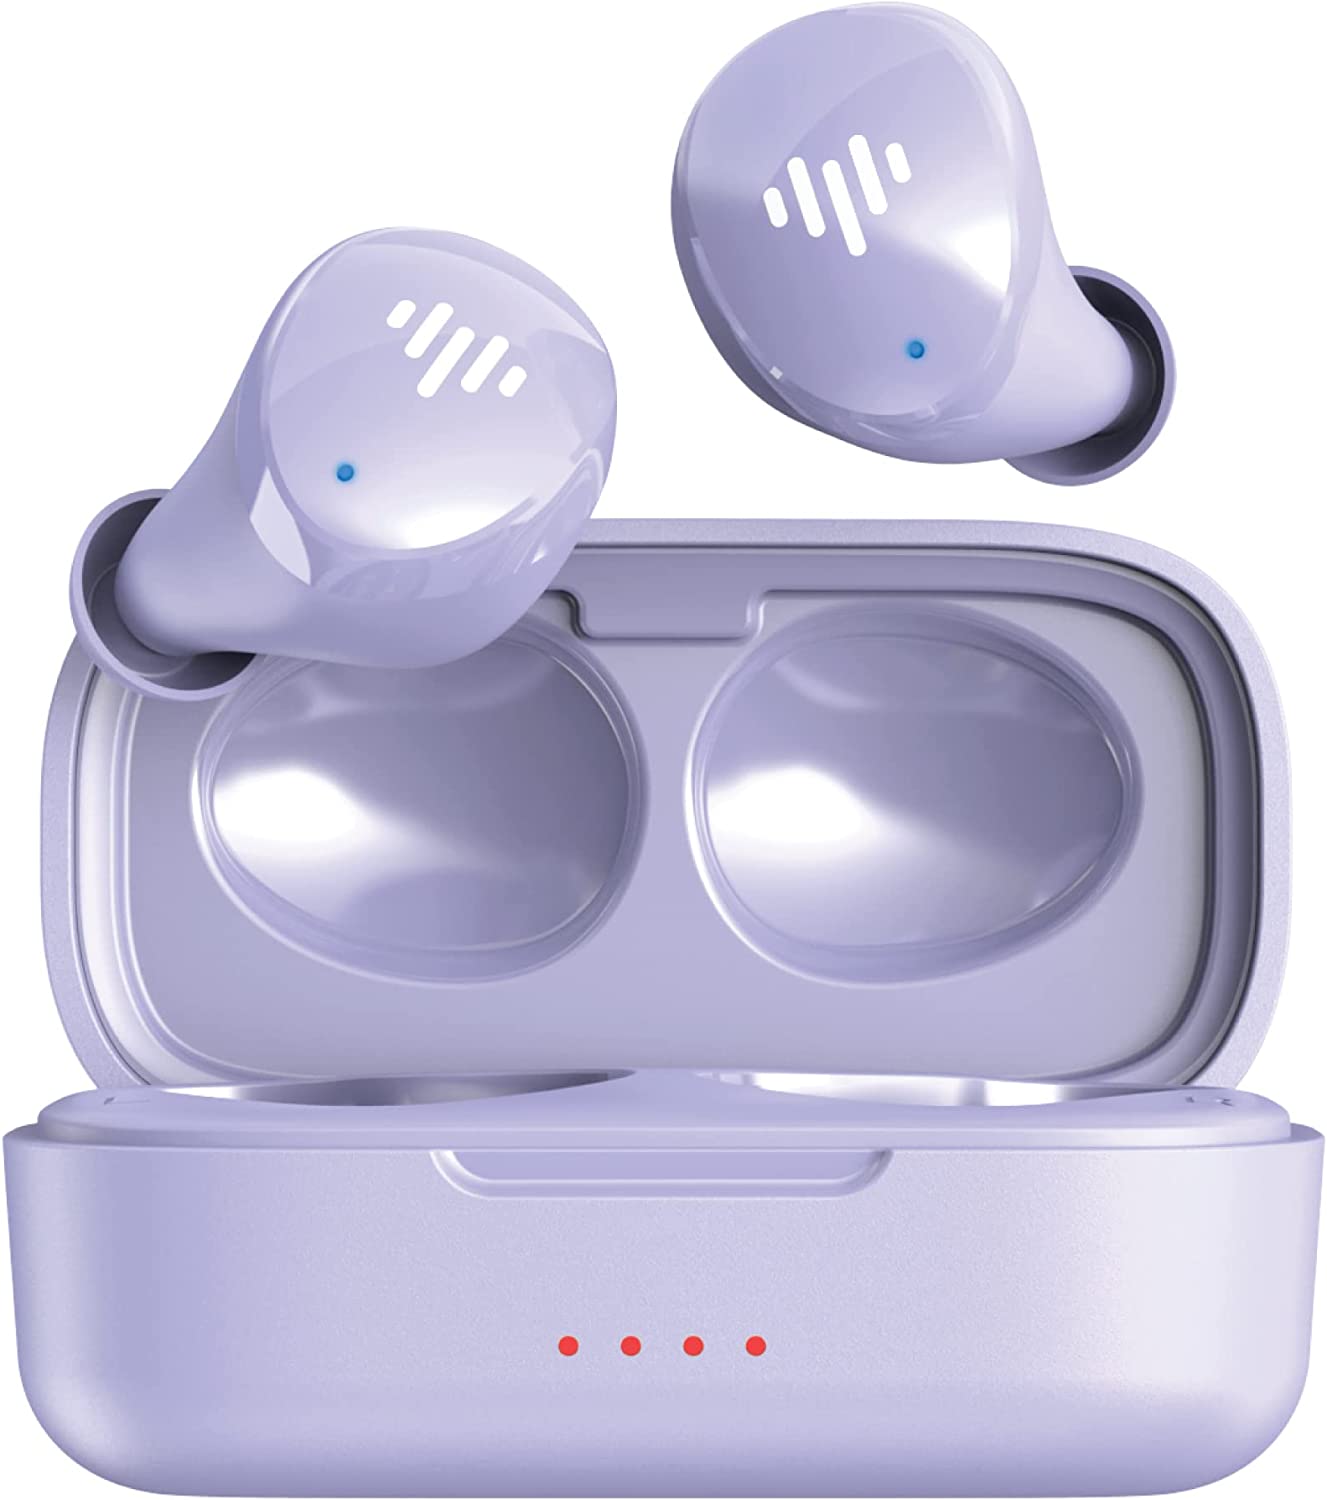 iLuv TB100 Wireless Earbuds, Bluetooth 5.3, Built-in Microphone, 20 Hour Playtime, IPX6 Waterproof Protection, Compatible with Apple & Android, Includes Charging Case & 4 Ear Tips, Purple